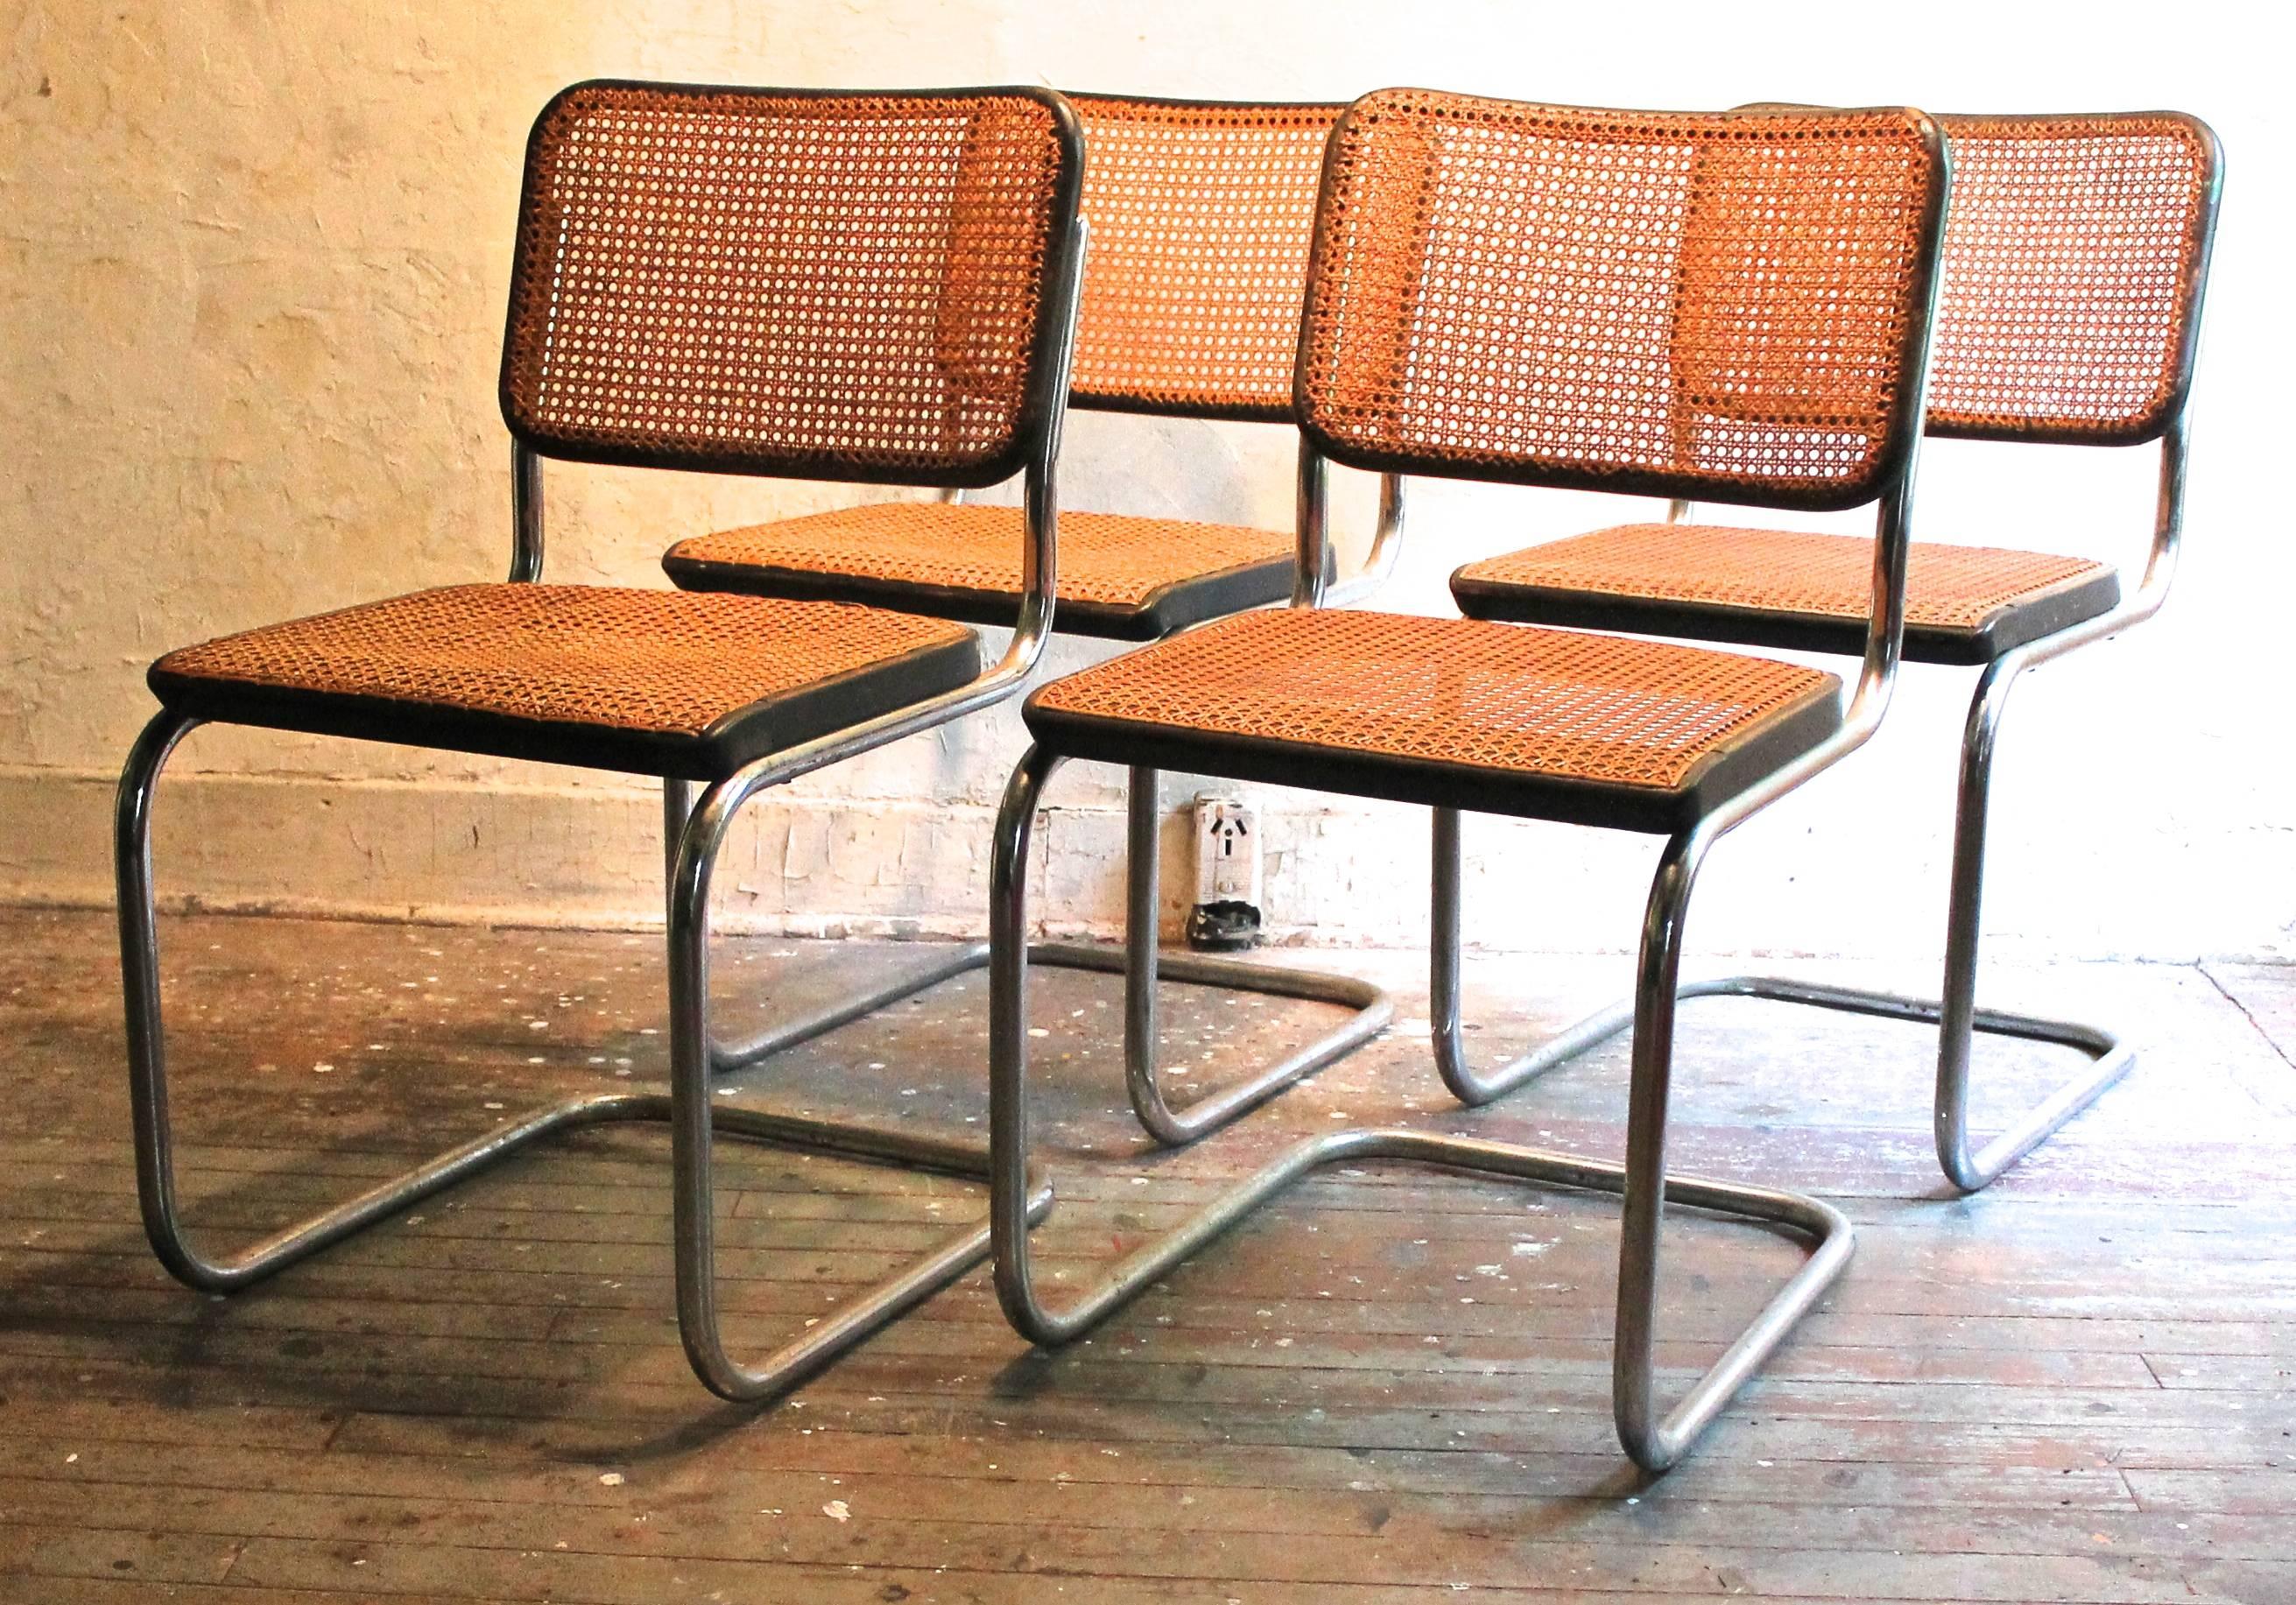 Purchased from the Vera Neumann estate, these chairs are from the Croton-On-Hudson, NY house that Marcel Breuer built for the Neumann's in 1953. These B32's are pre Knoll, most likely by Thonet or specially made for the Neumann project. Early